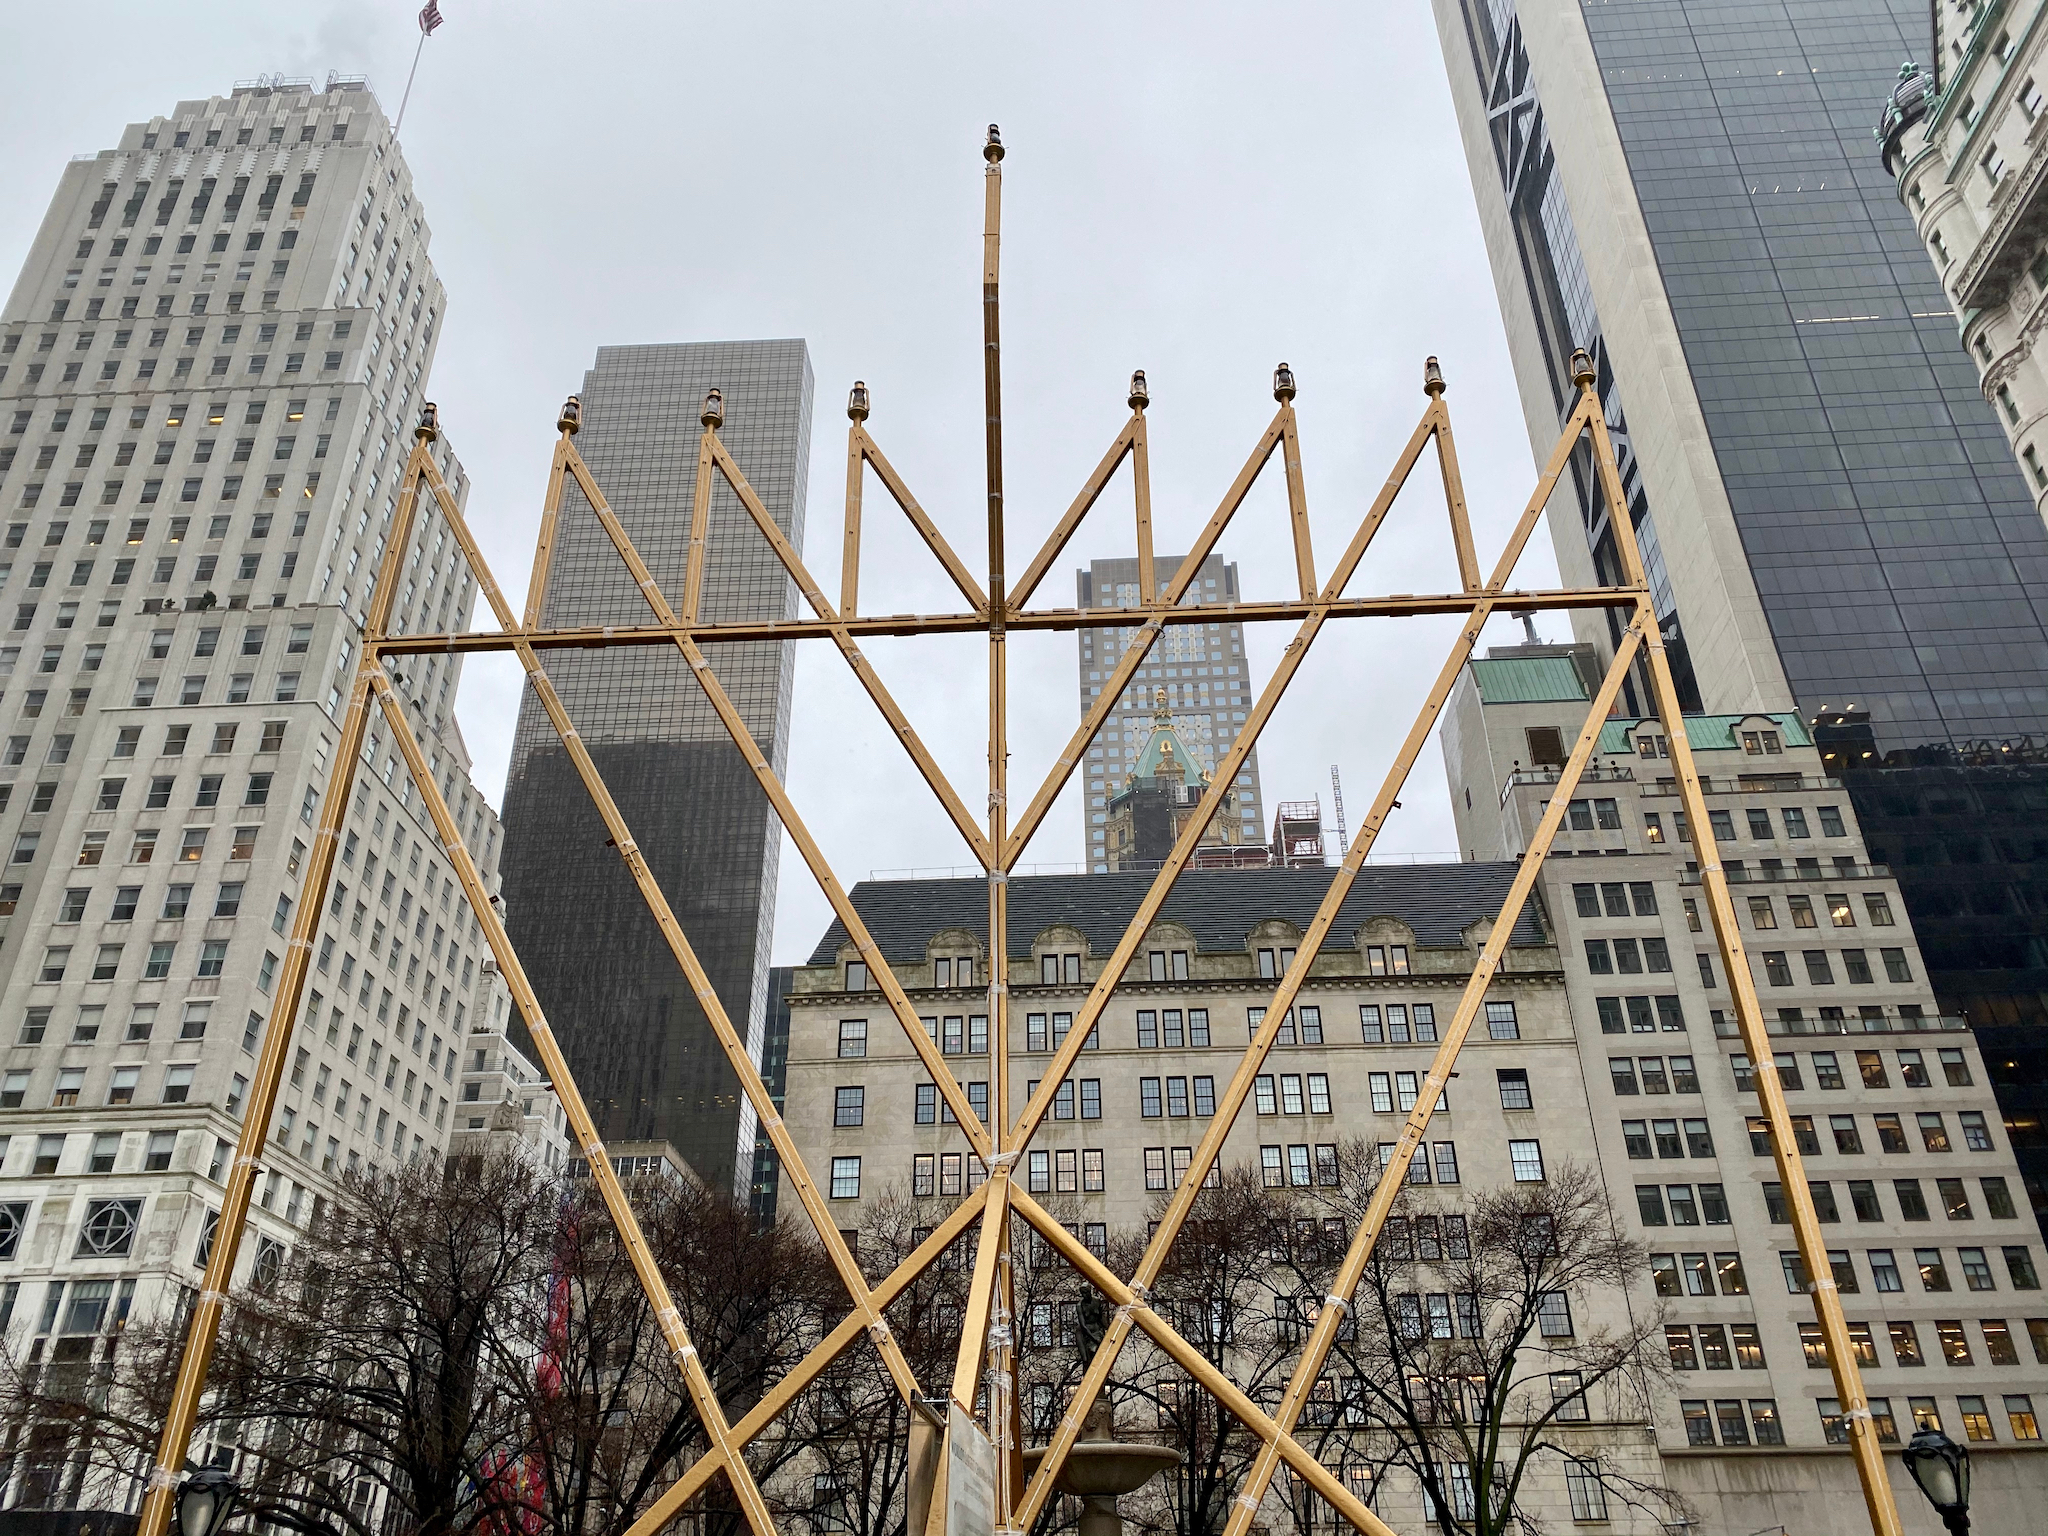 The largest menorah in the world will be lit in NYC this December